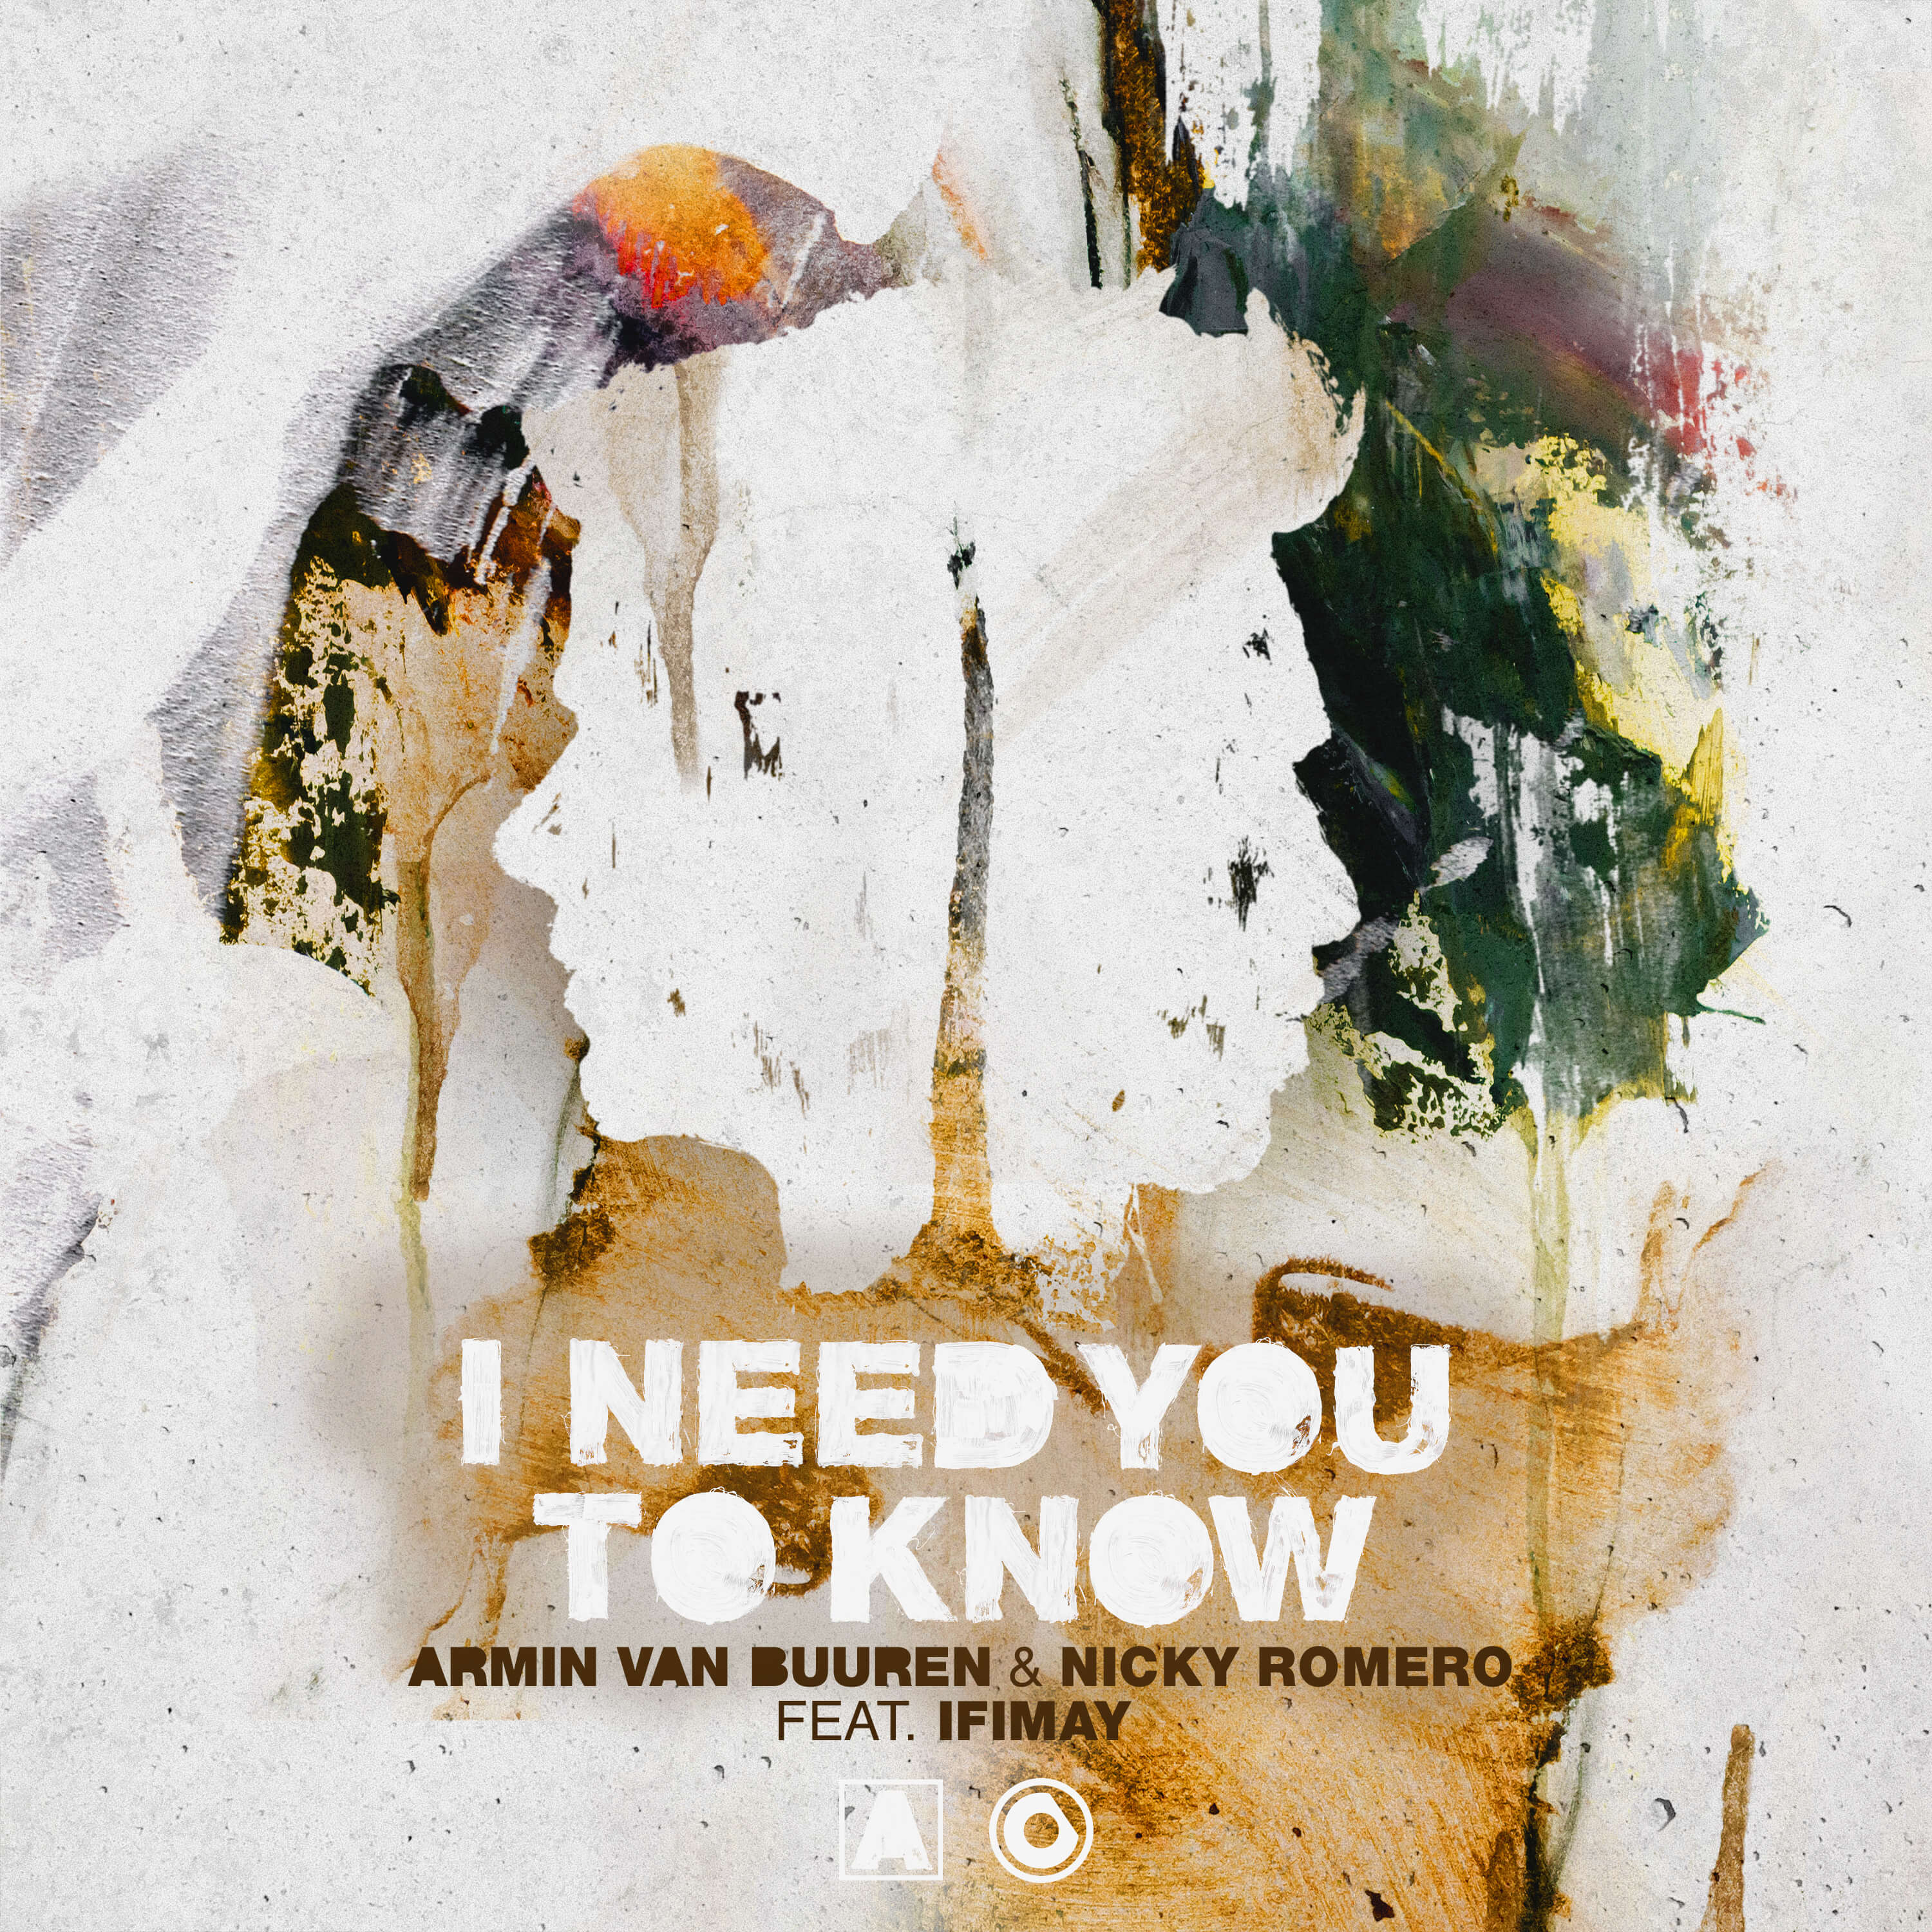 Party with Armin van Buuren and Nicky Romero’s ‘I Need You To Know’